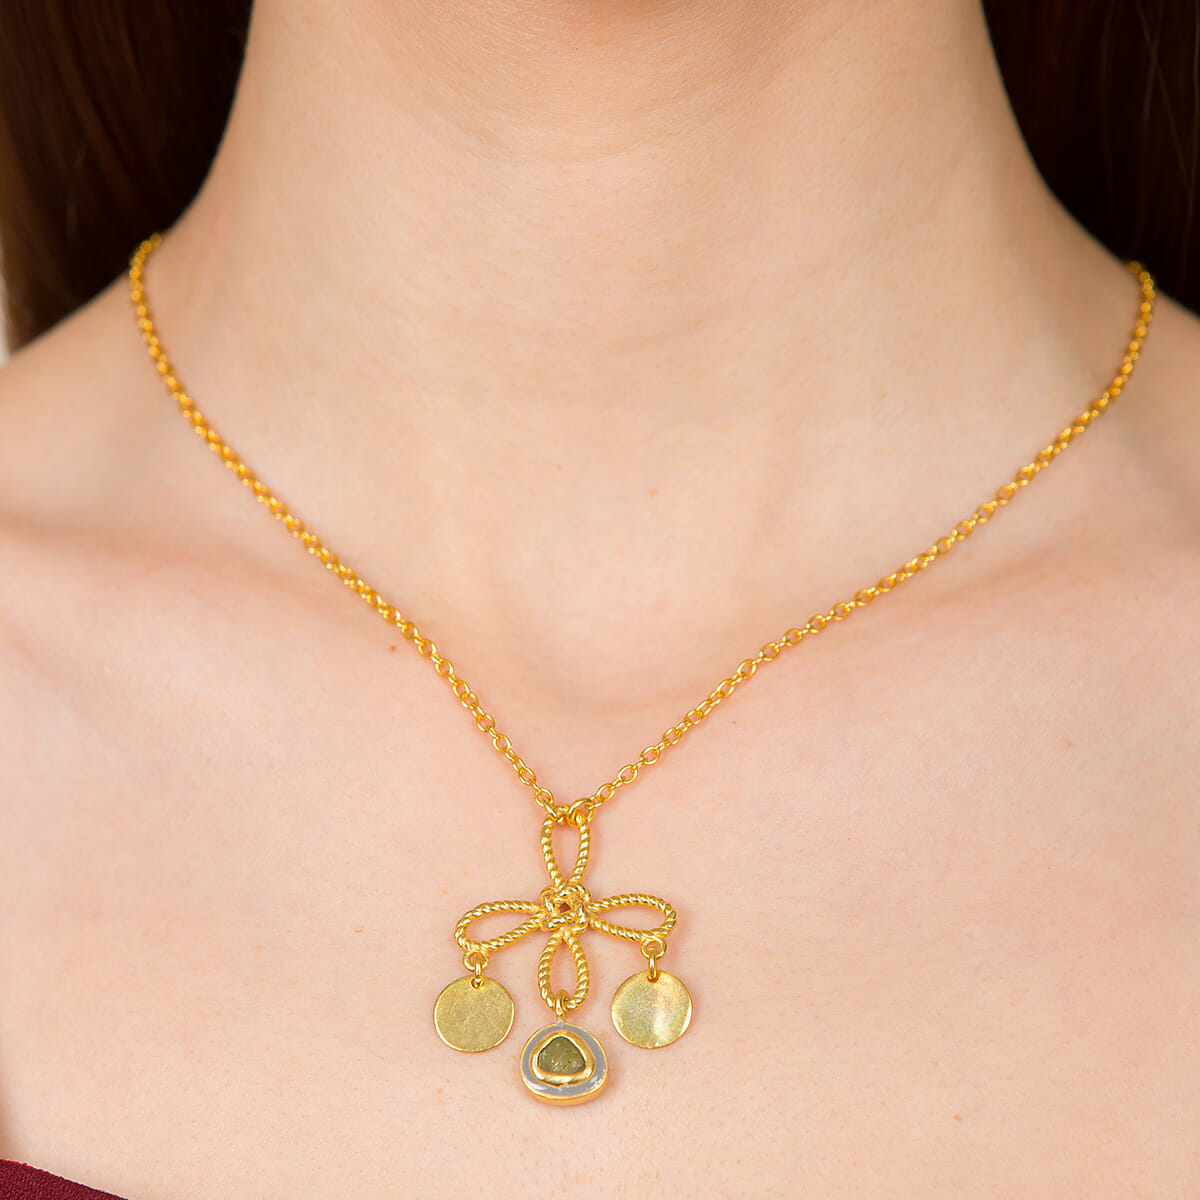 Knotted Flowers Necklace